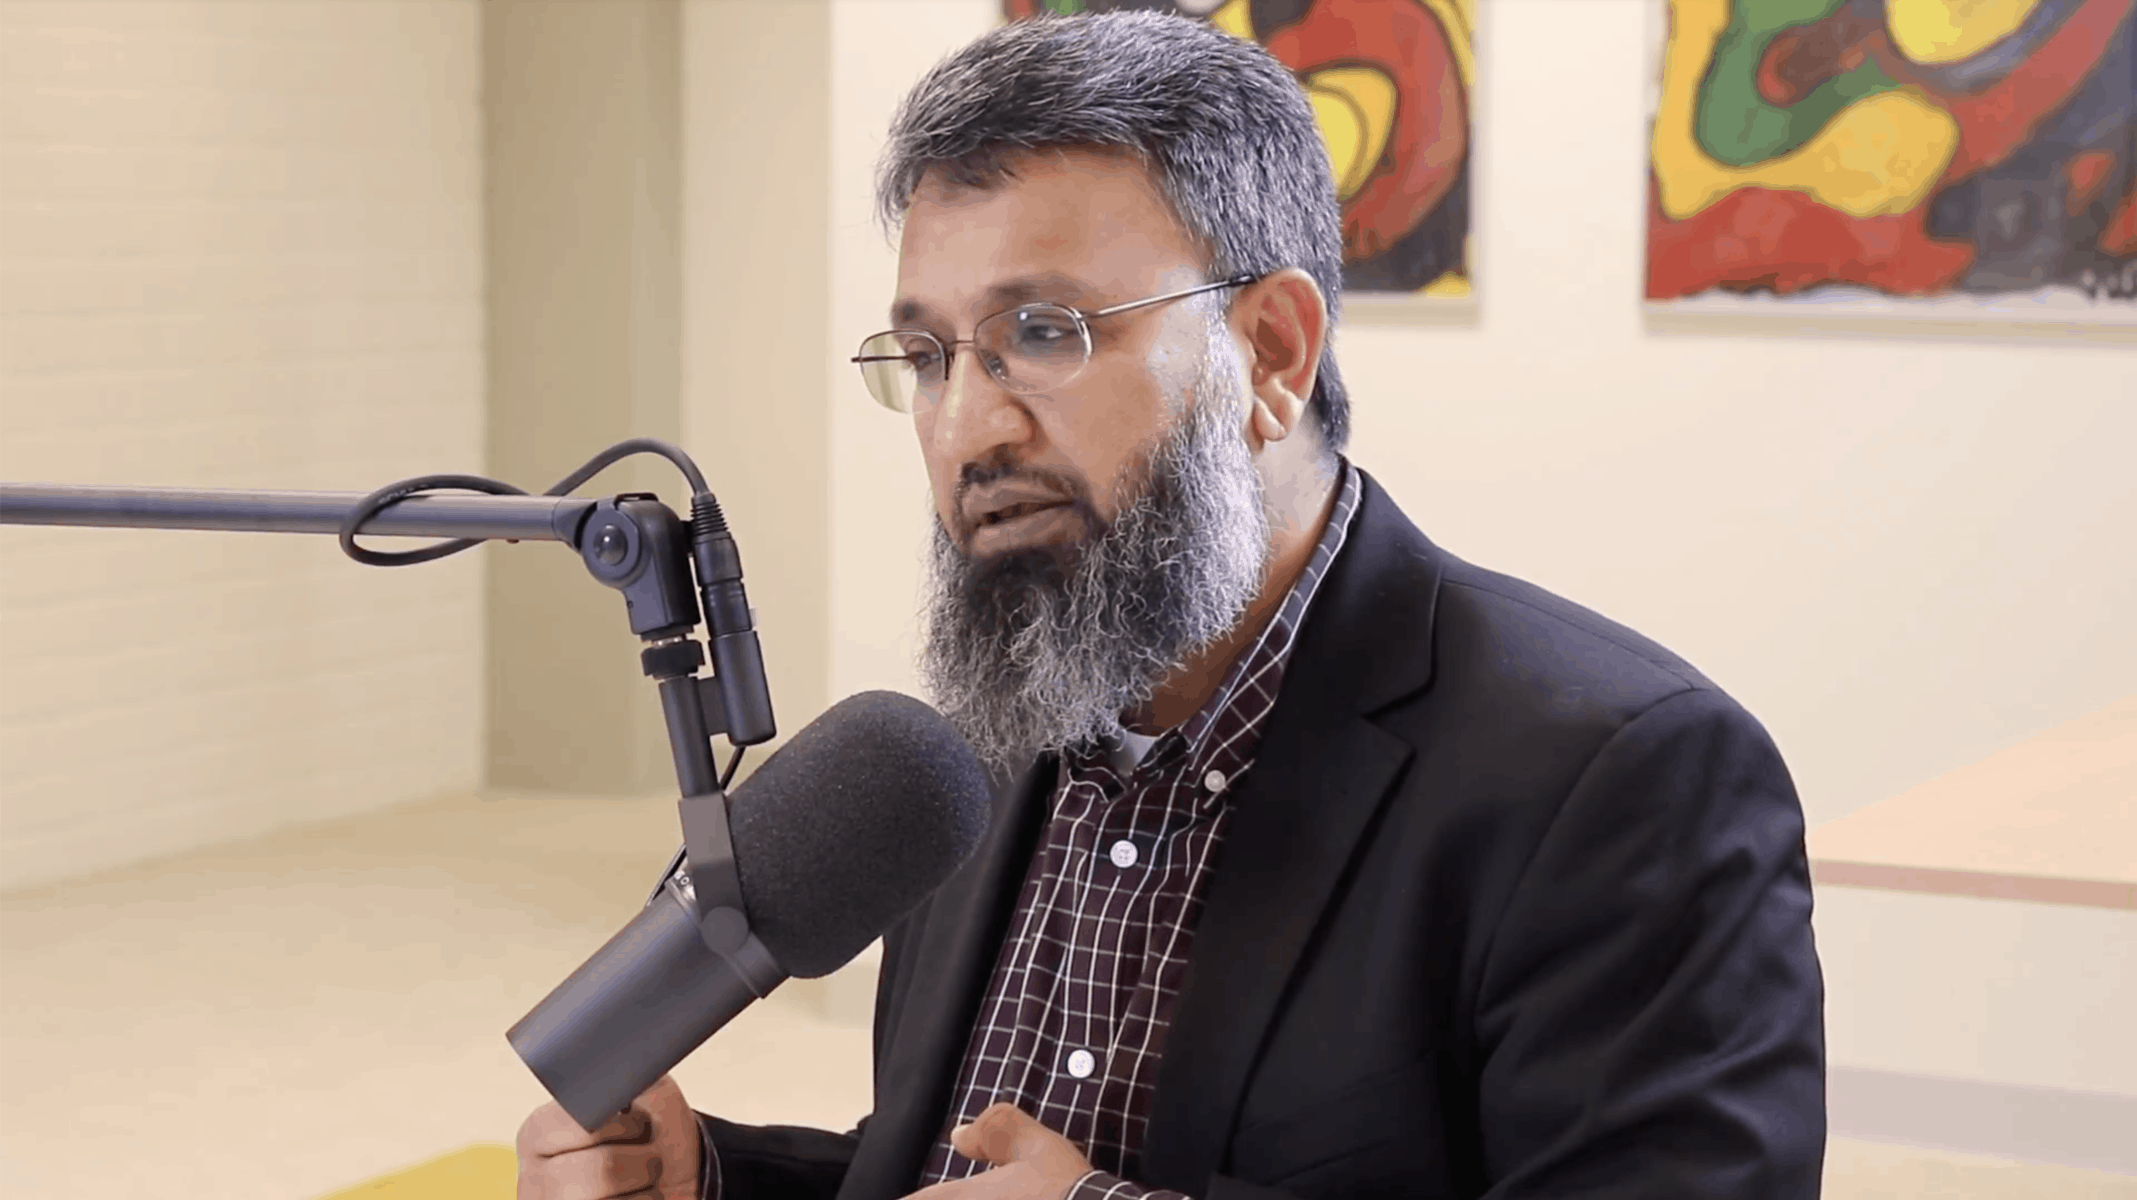 Altaf Husain – Religious identity on campus and serving the community